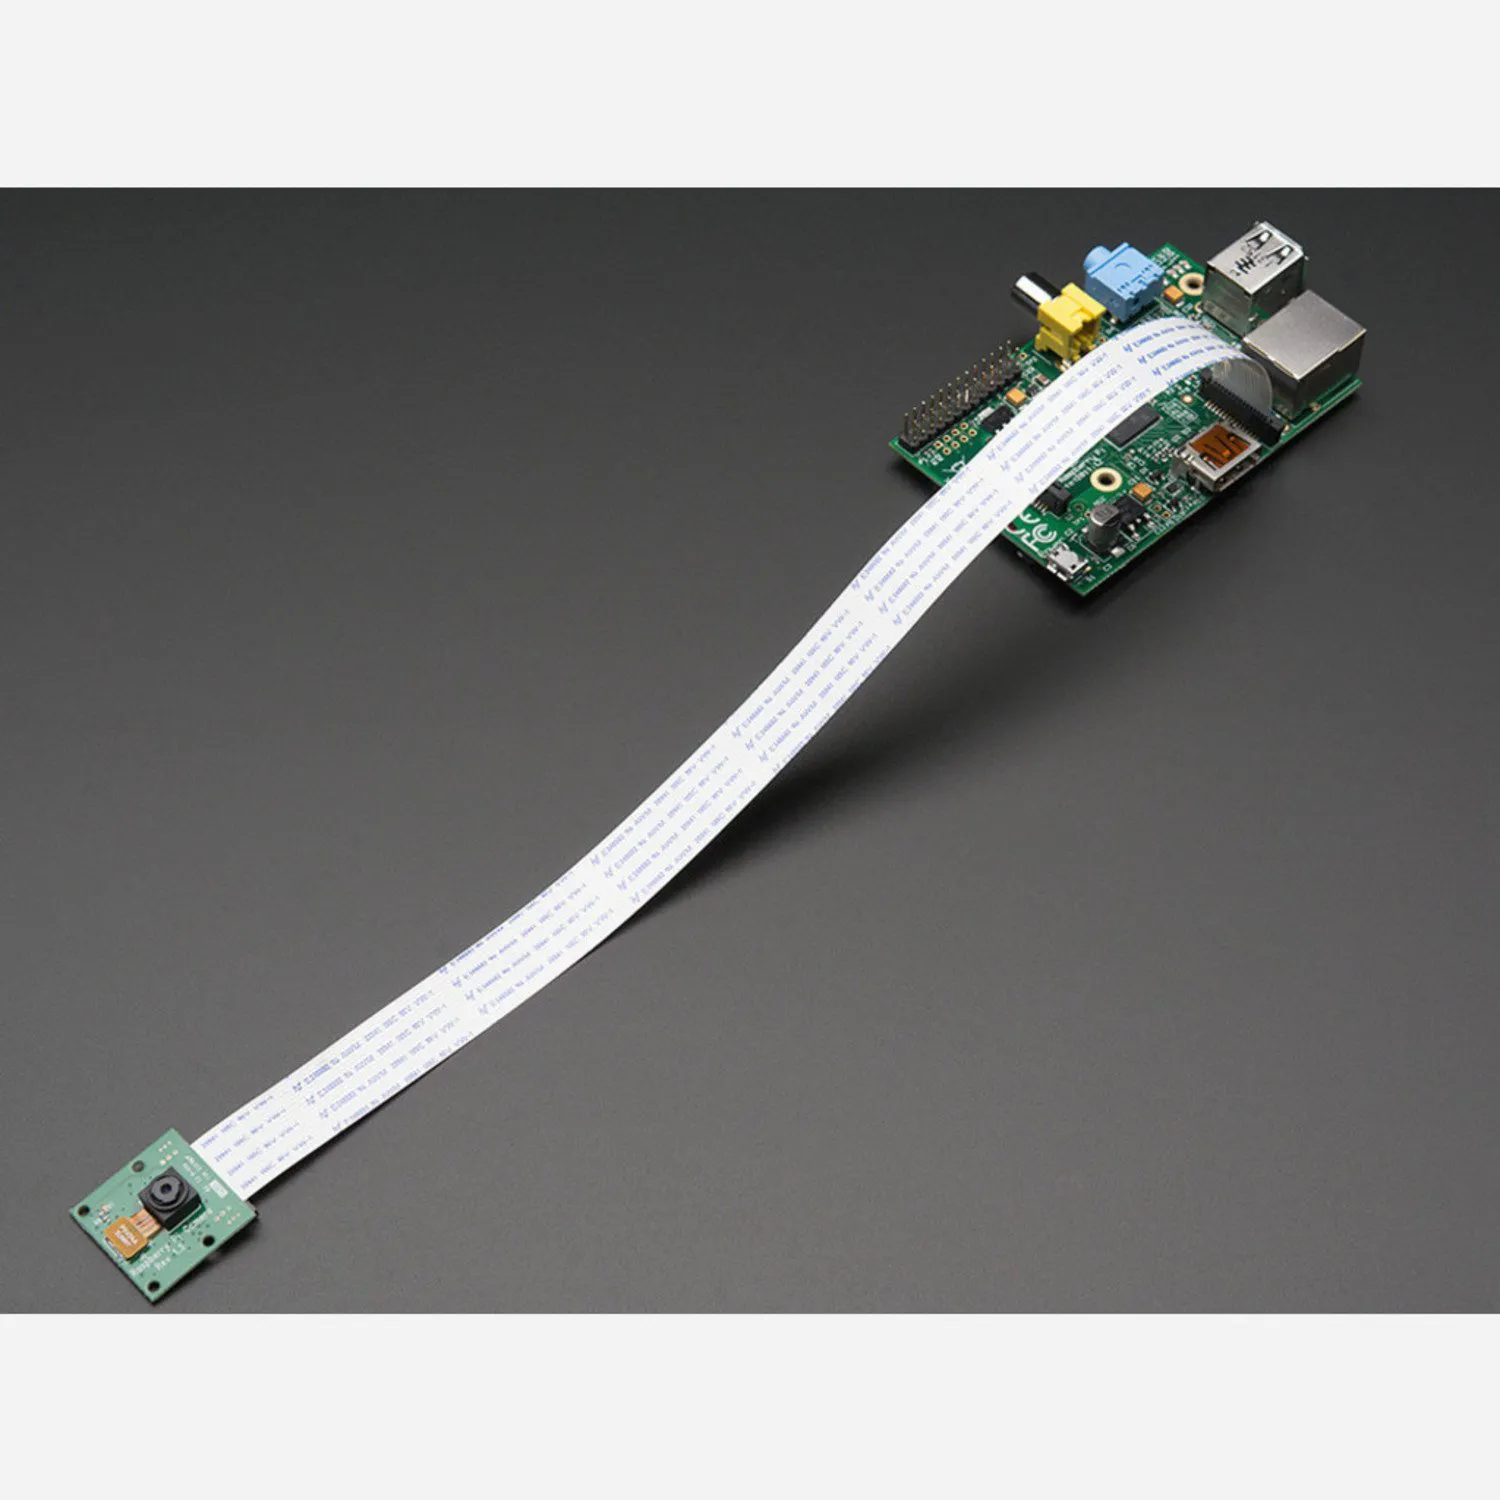 Photo of Flex Cable for Raspberry Pi Camera - 300mm / 12